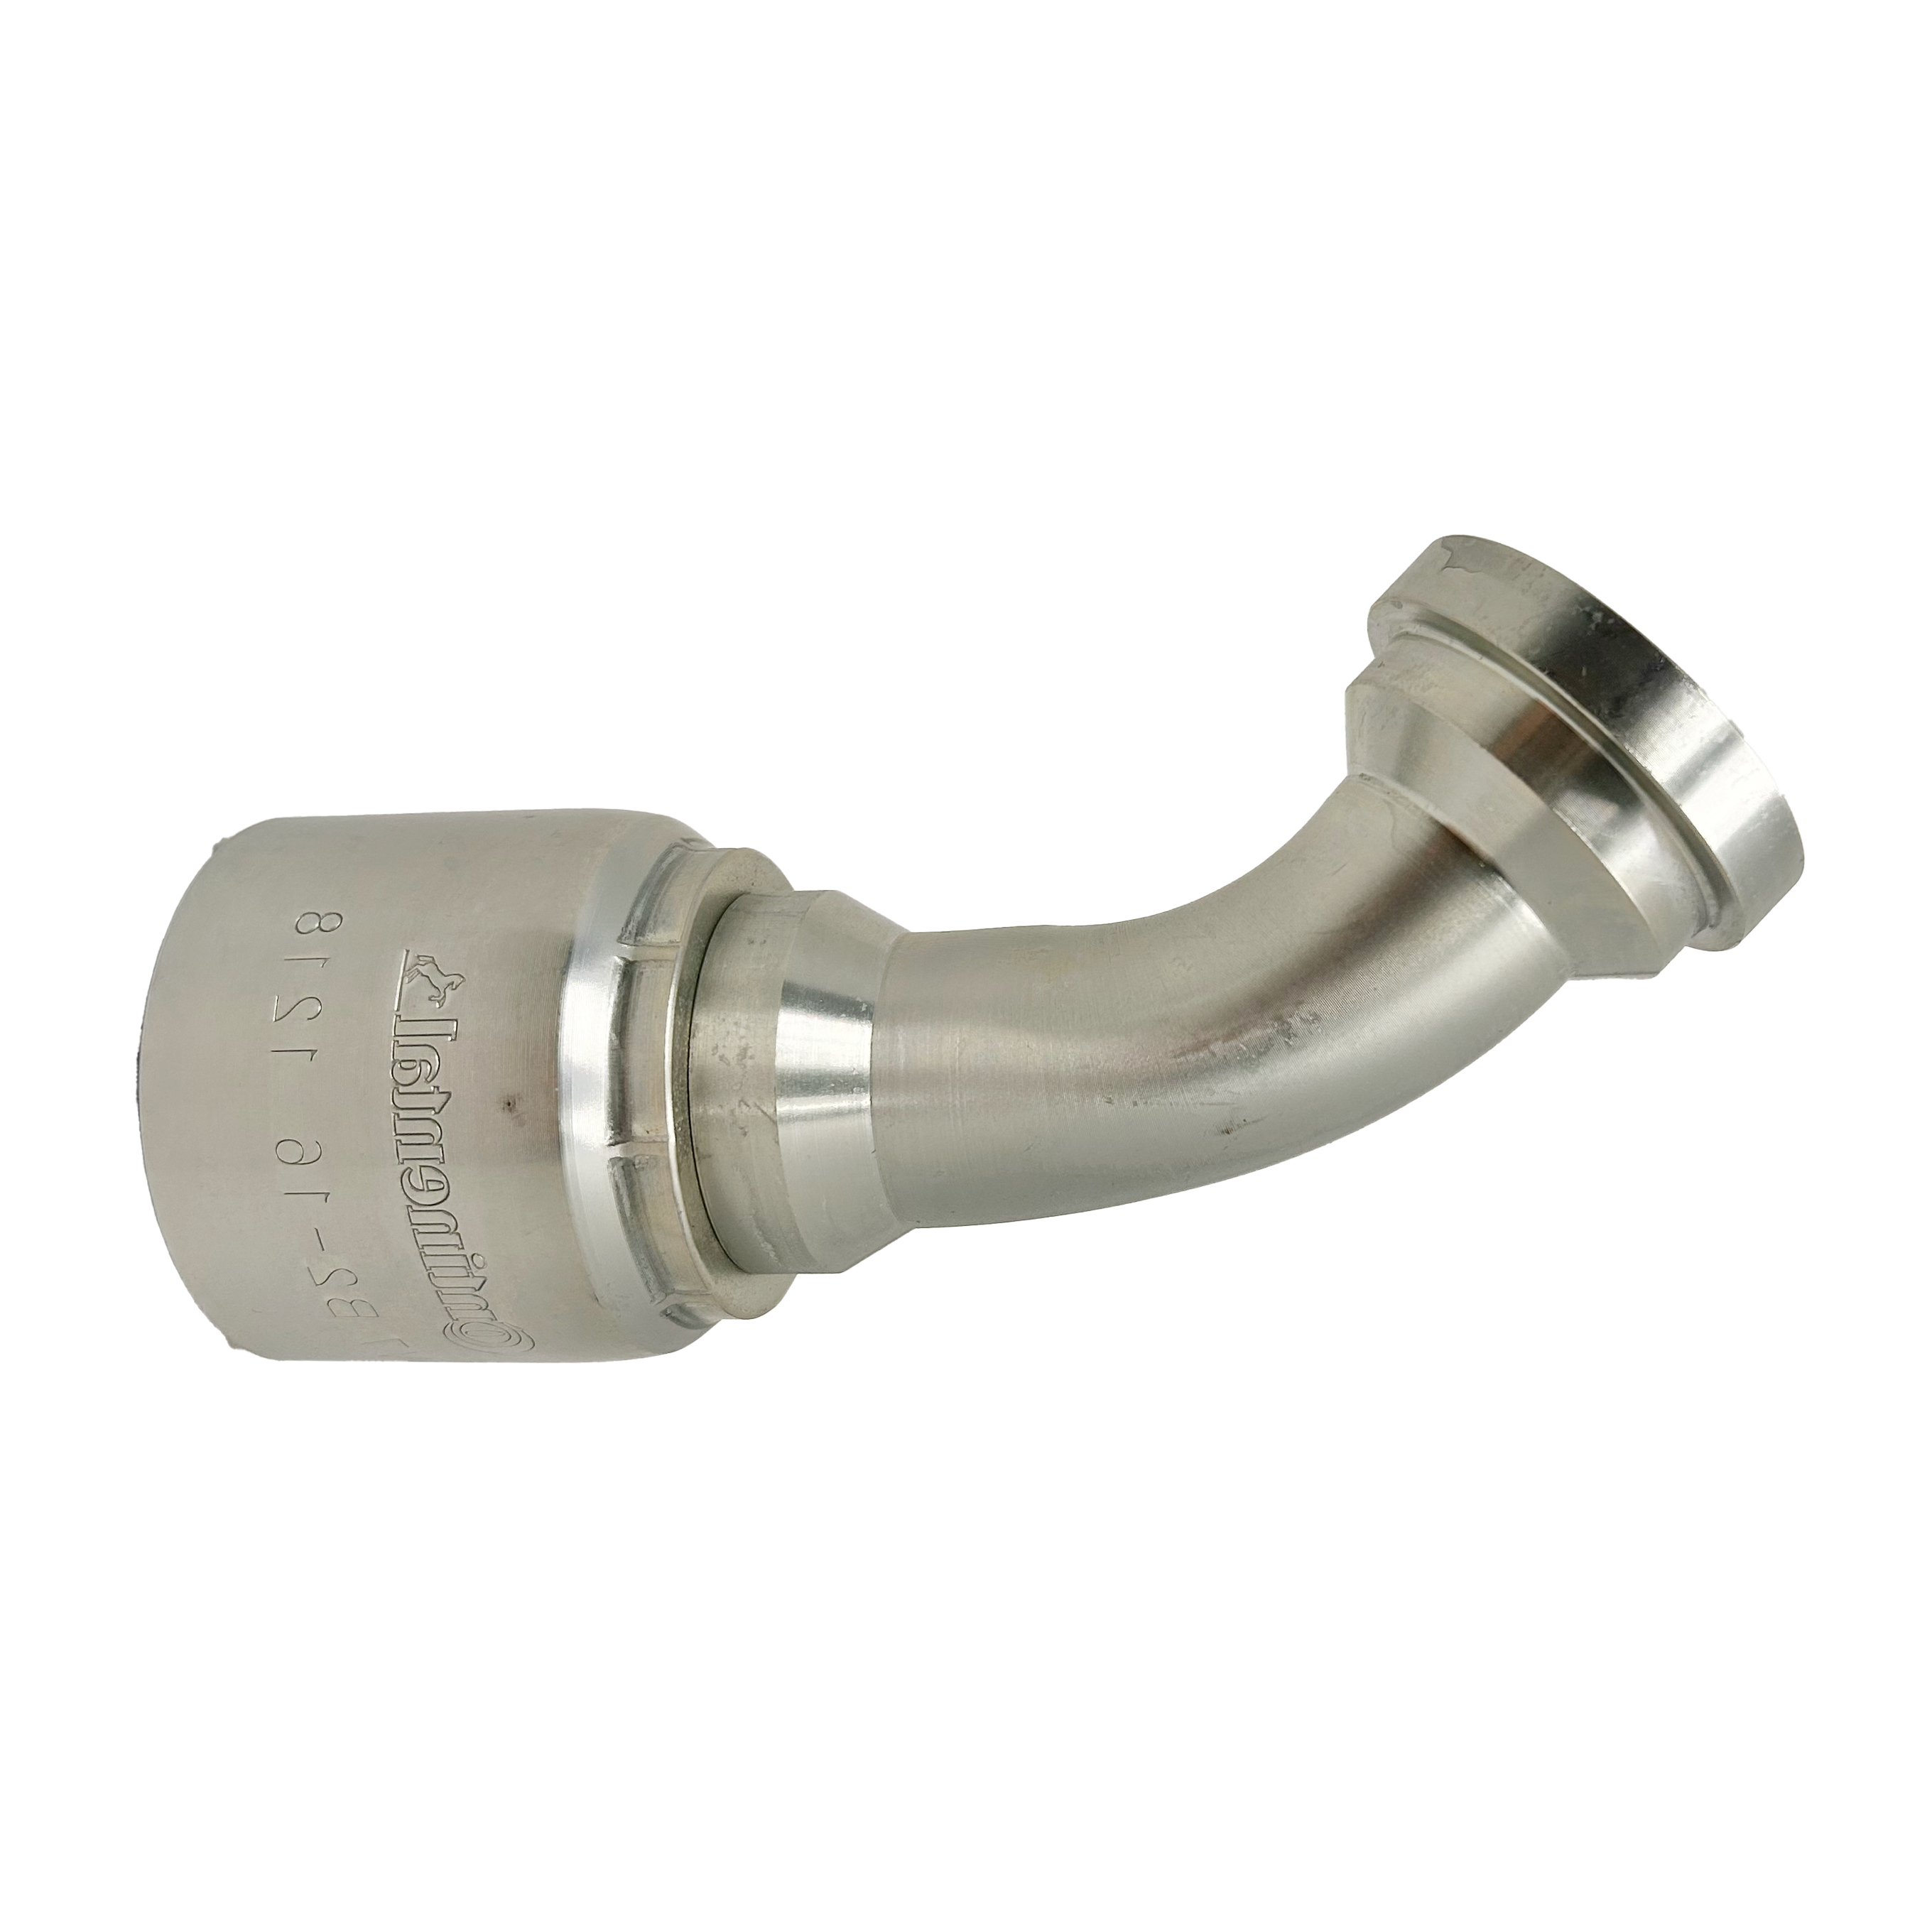 B2-FL45-3232S: Continental Hose Fitting, 2" Hose ID x 2" Code 61, 45-Degree Connection